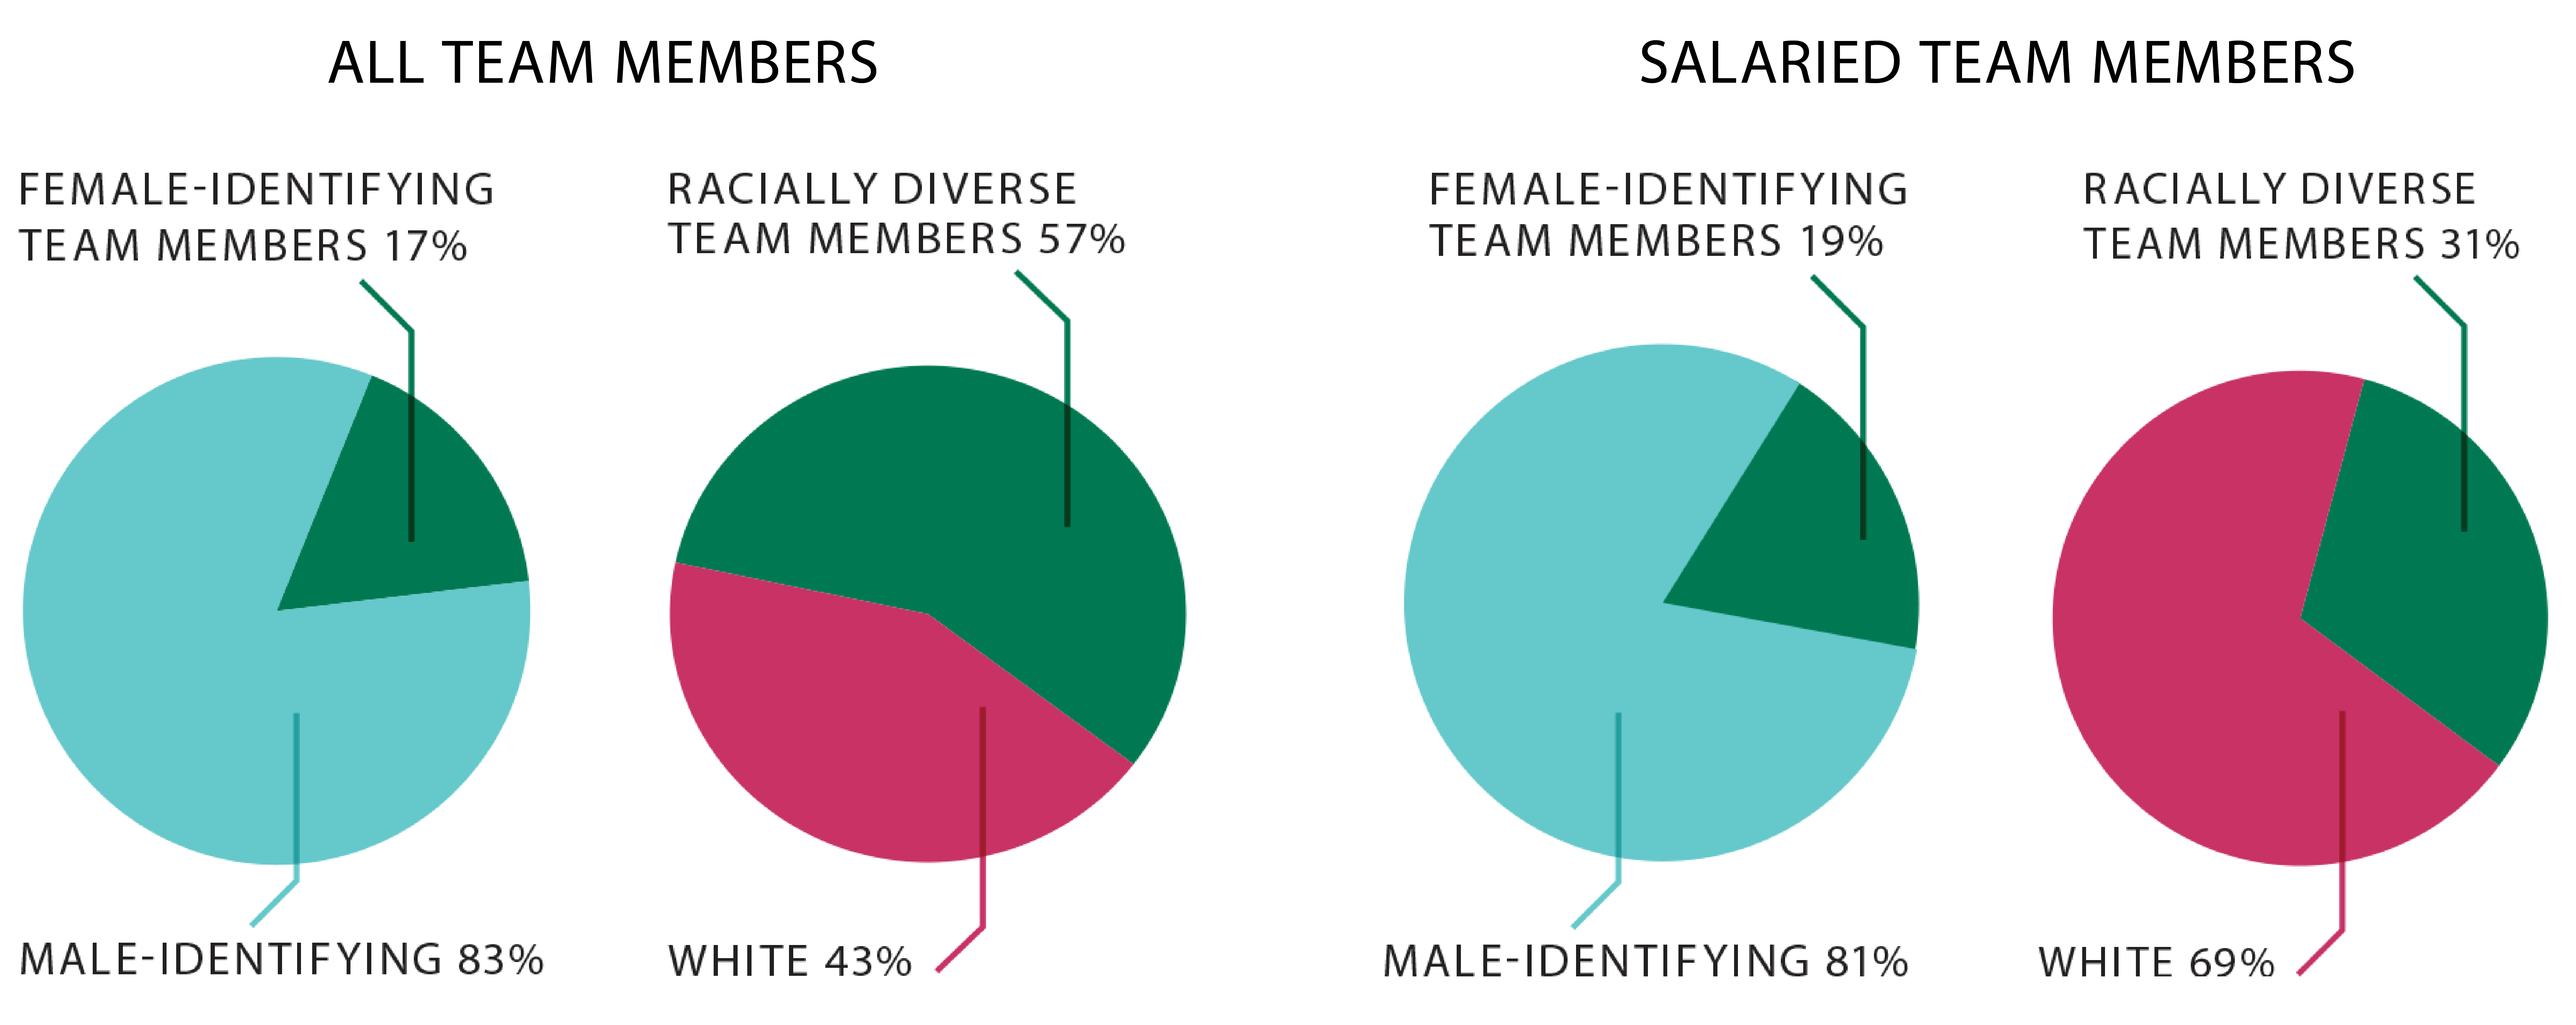 Pie charts on diversity, equity and inclusion